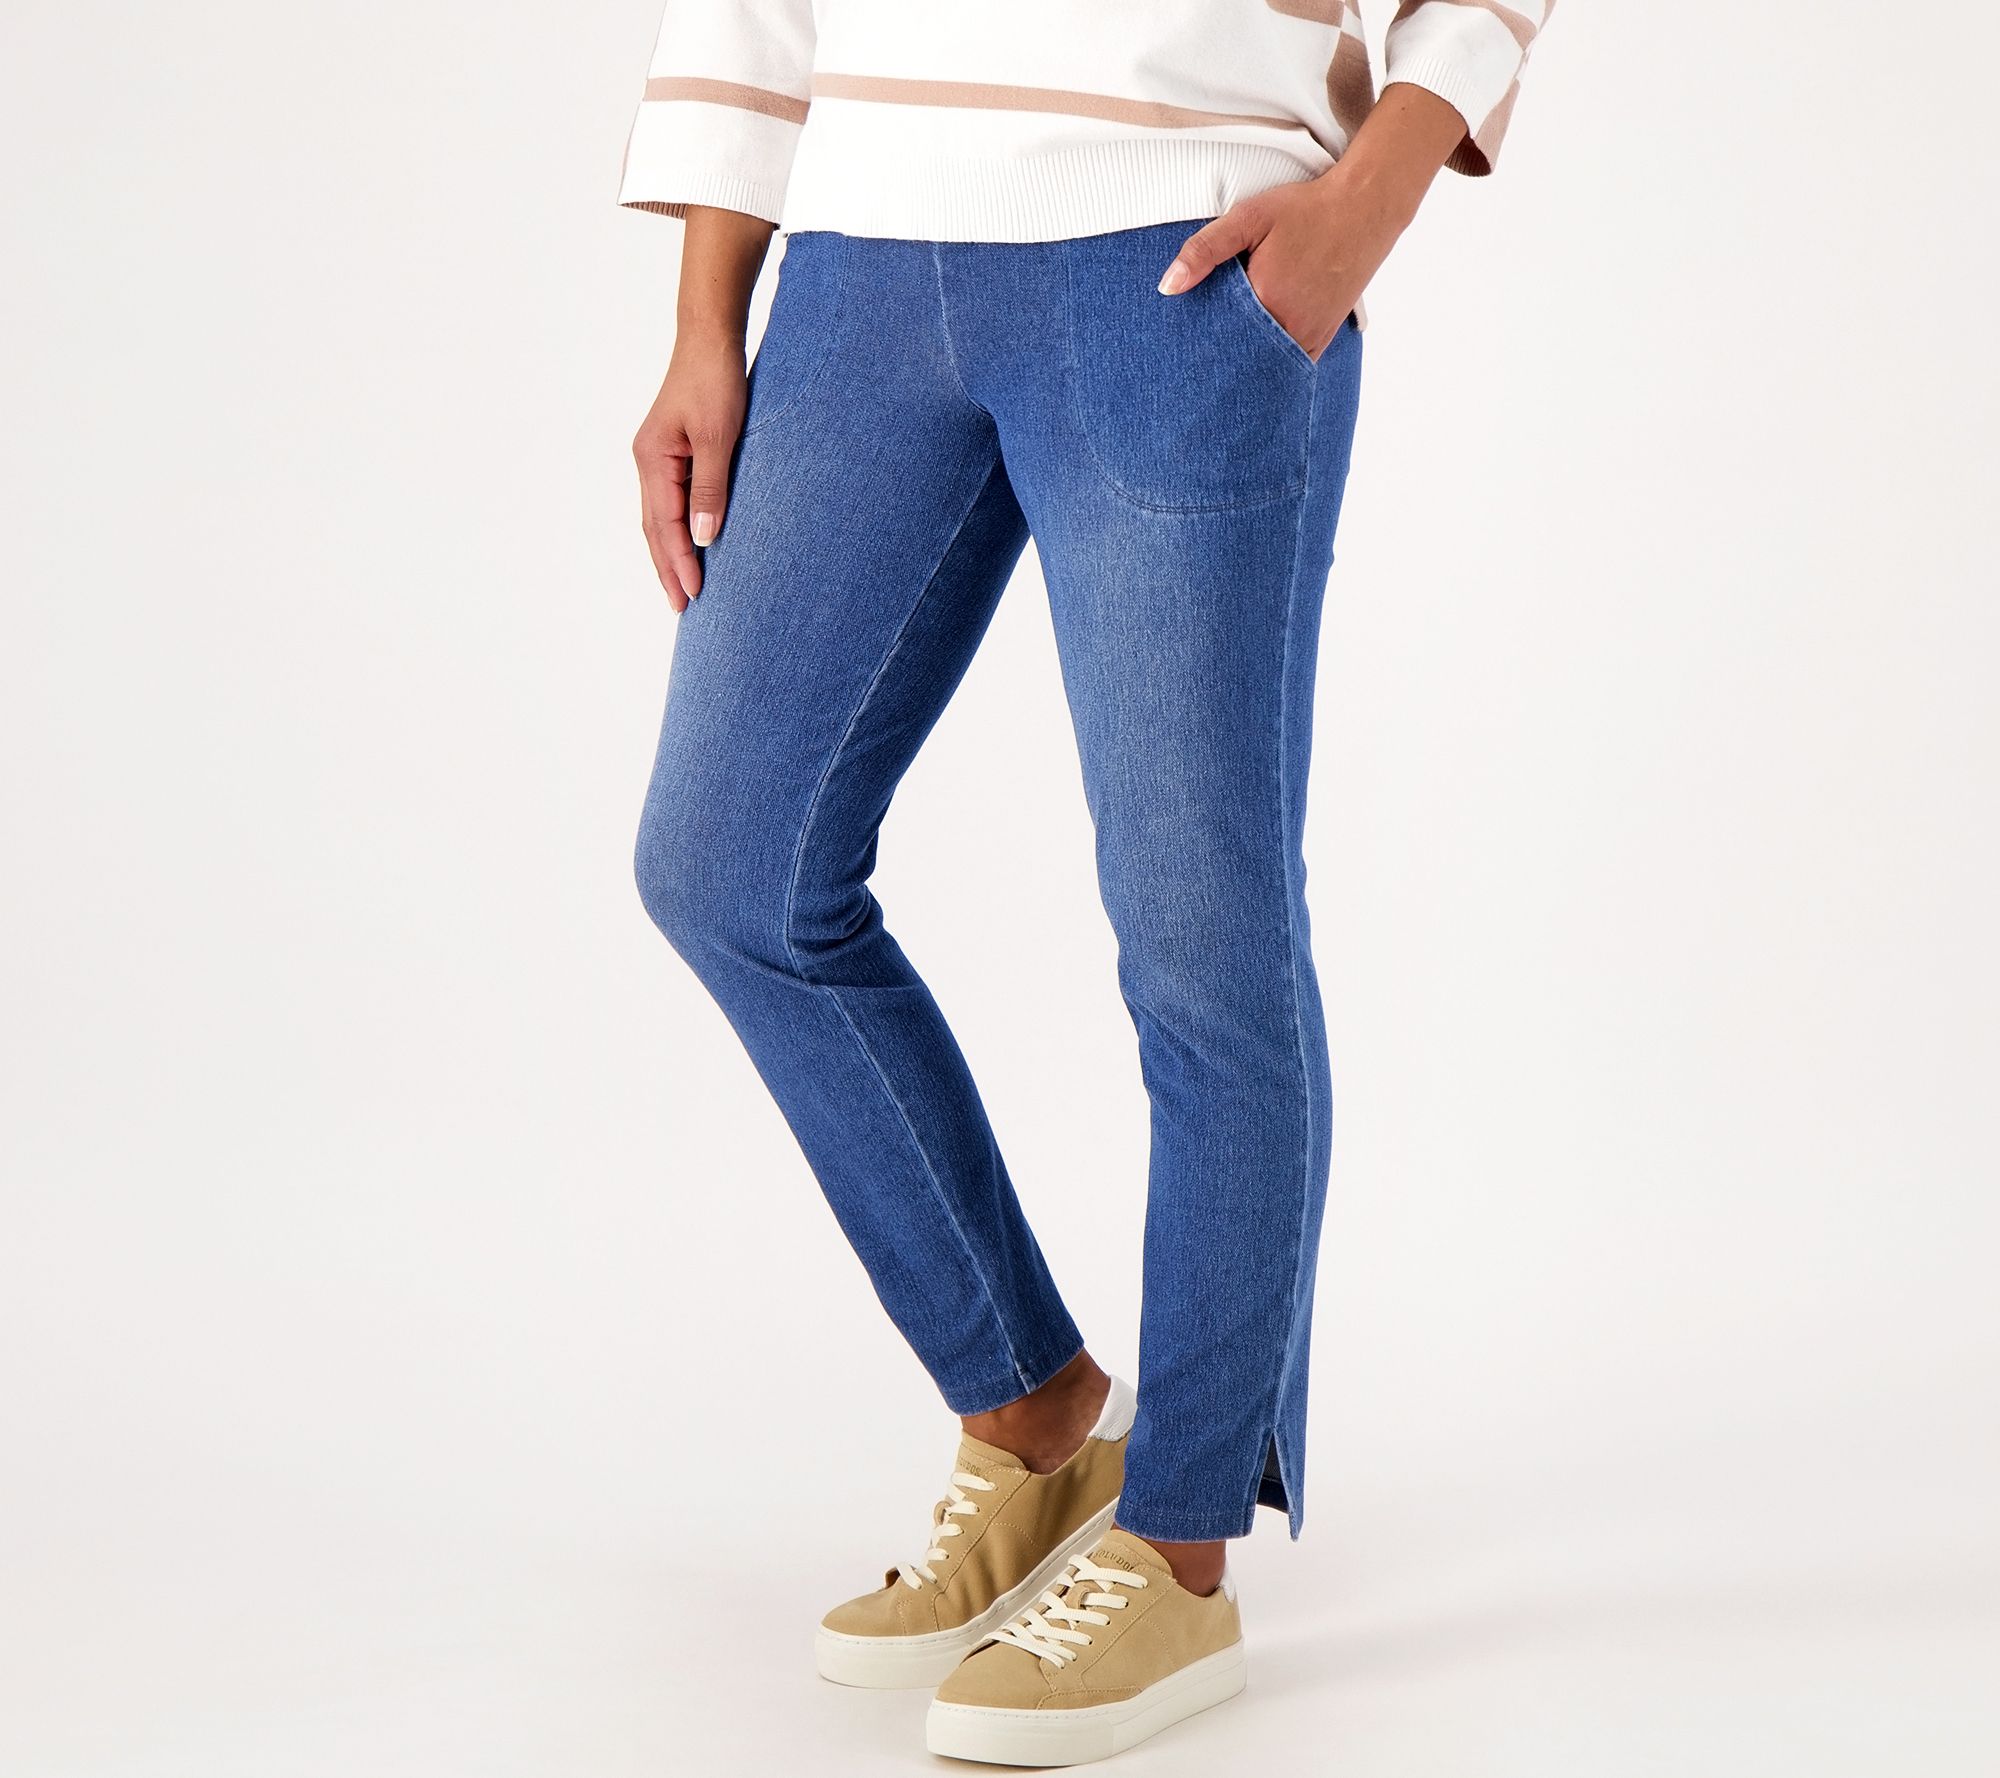 Women With Control Petite Cotton Jersey Pull On Slim Pants